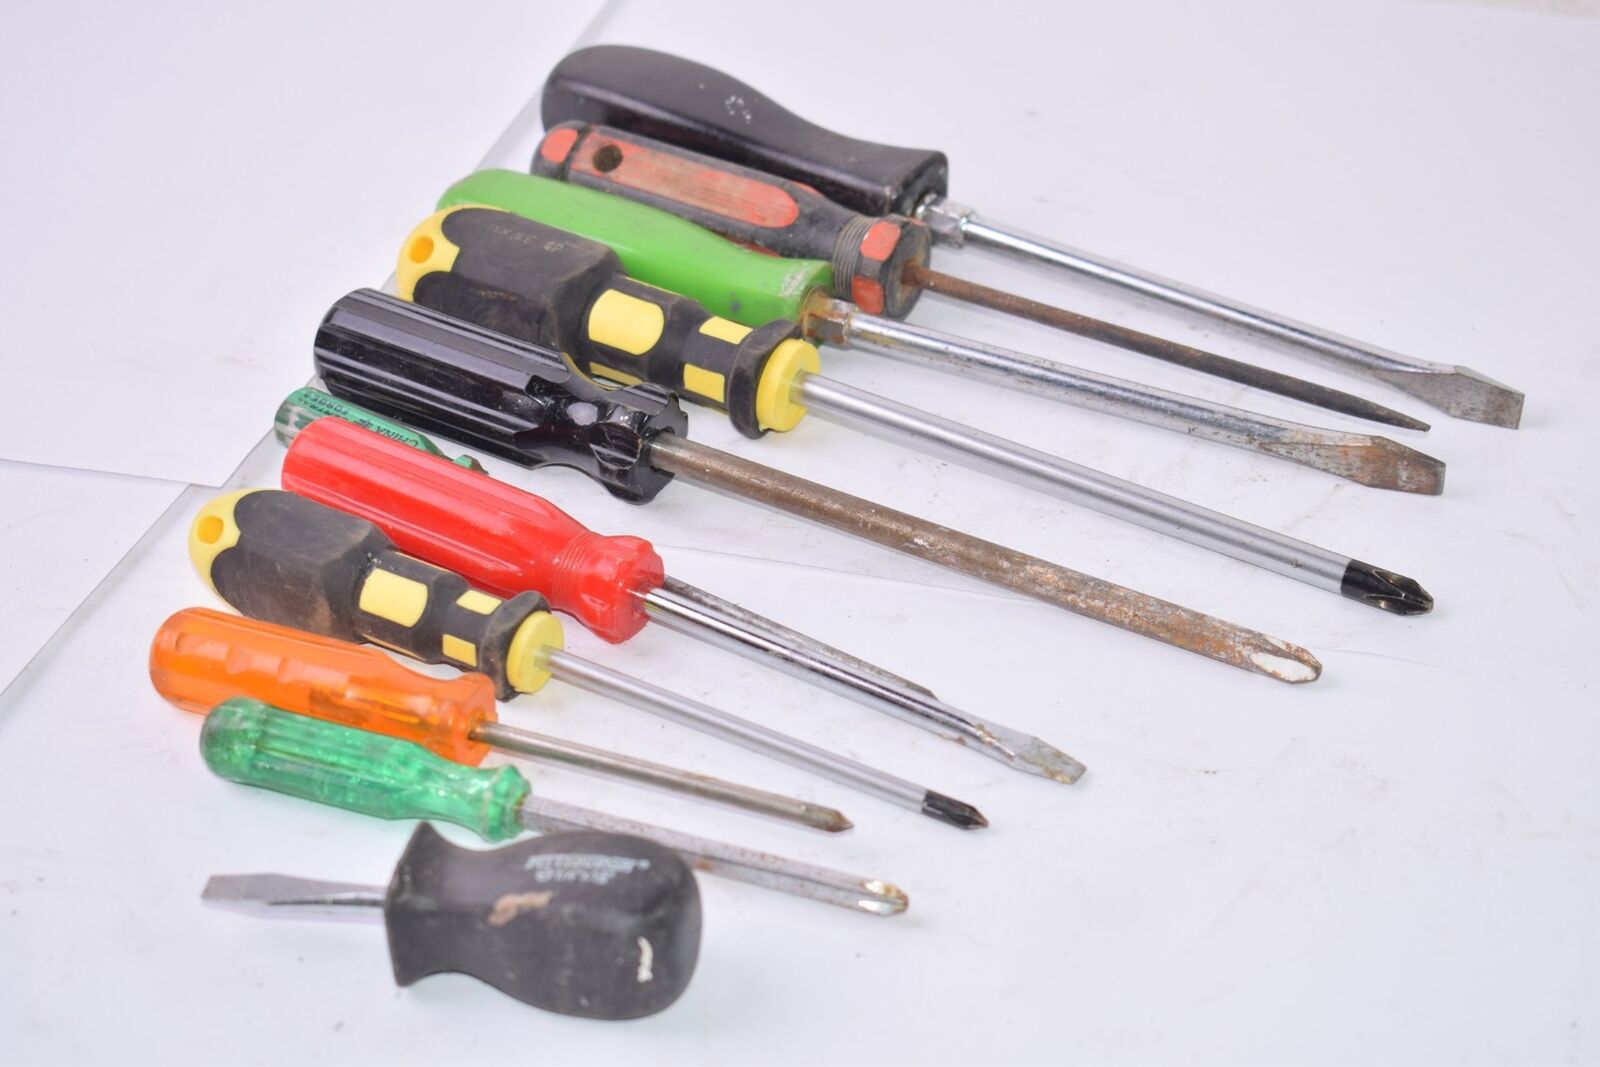 Mixed Lot Of 10 Assorted Screwdrivers, Mixed Sizes